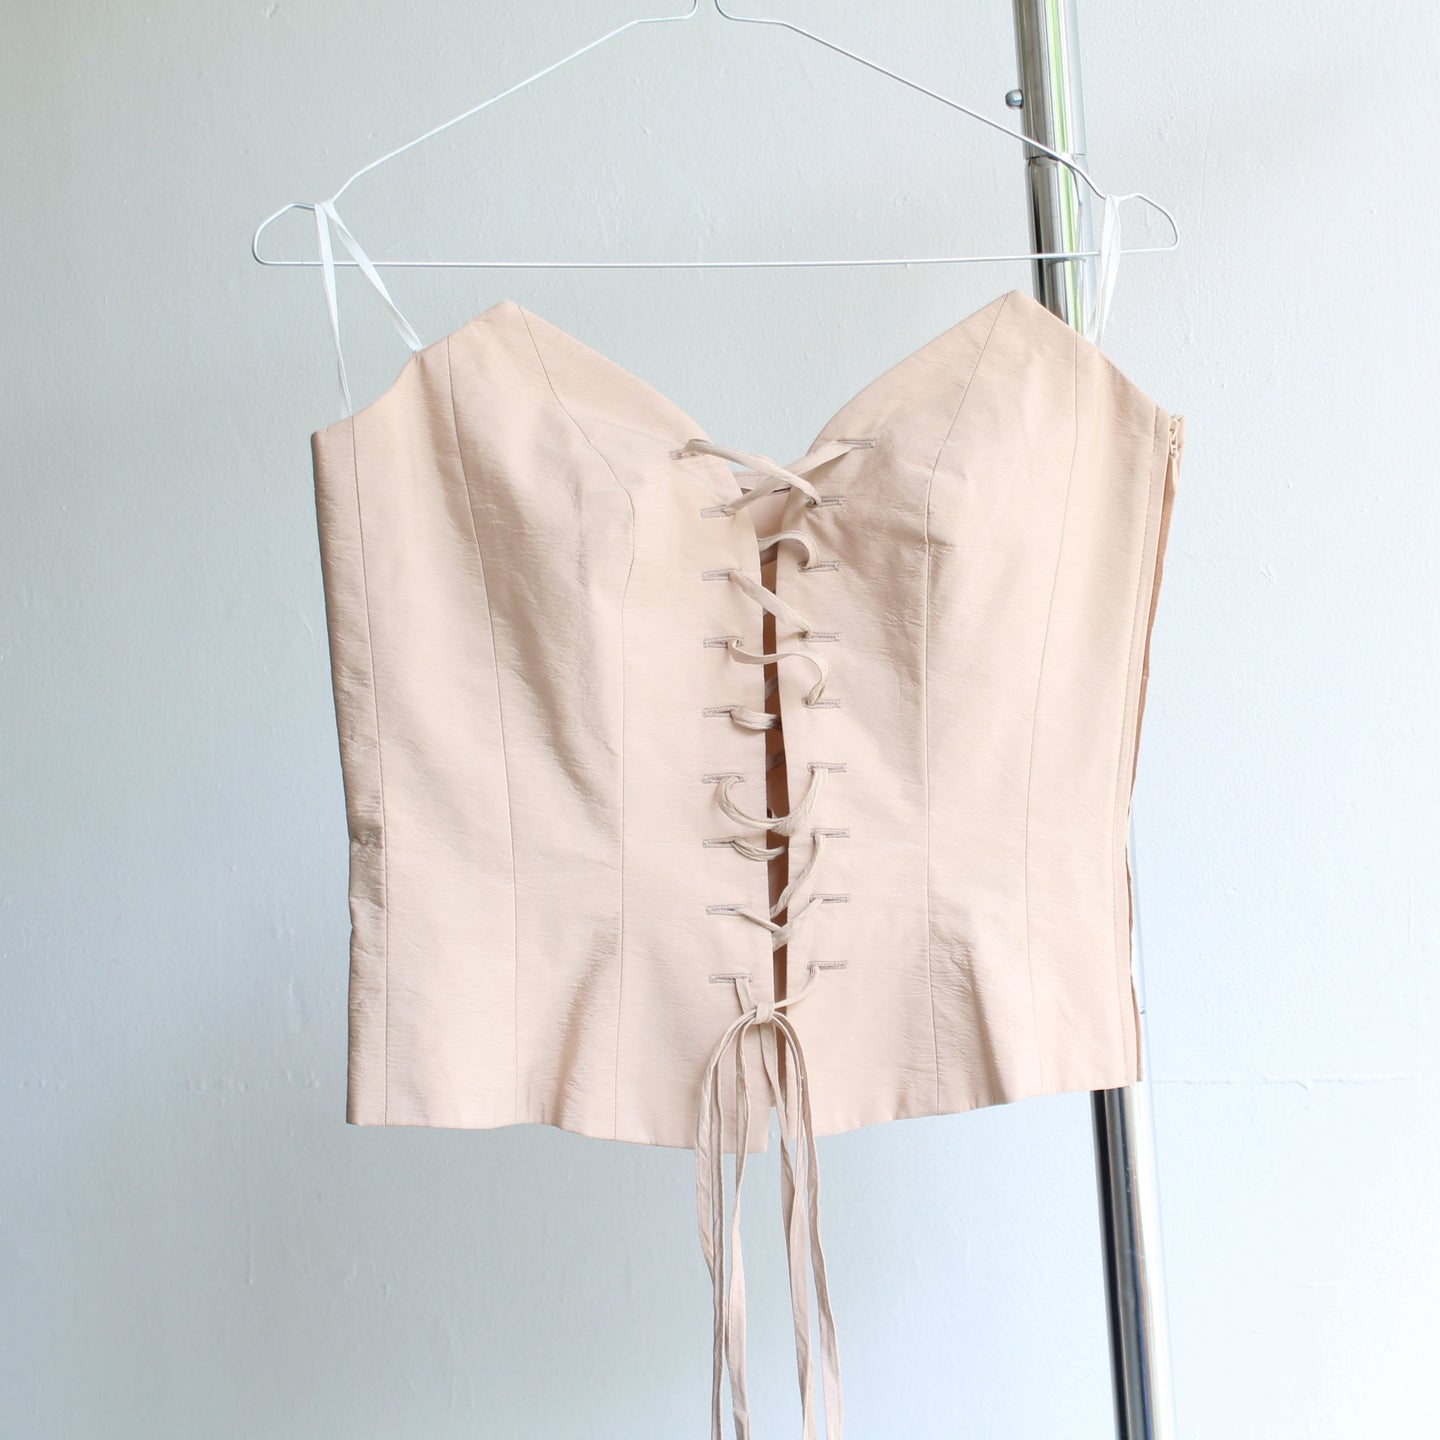 90's soft pink corset, size S